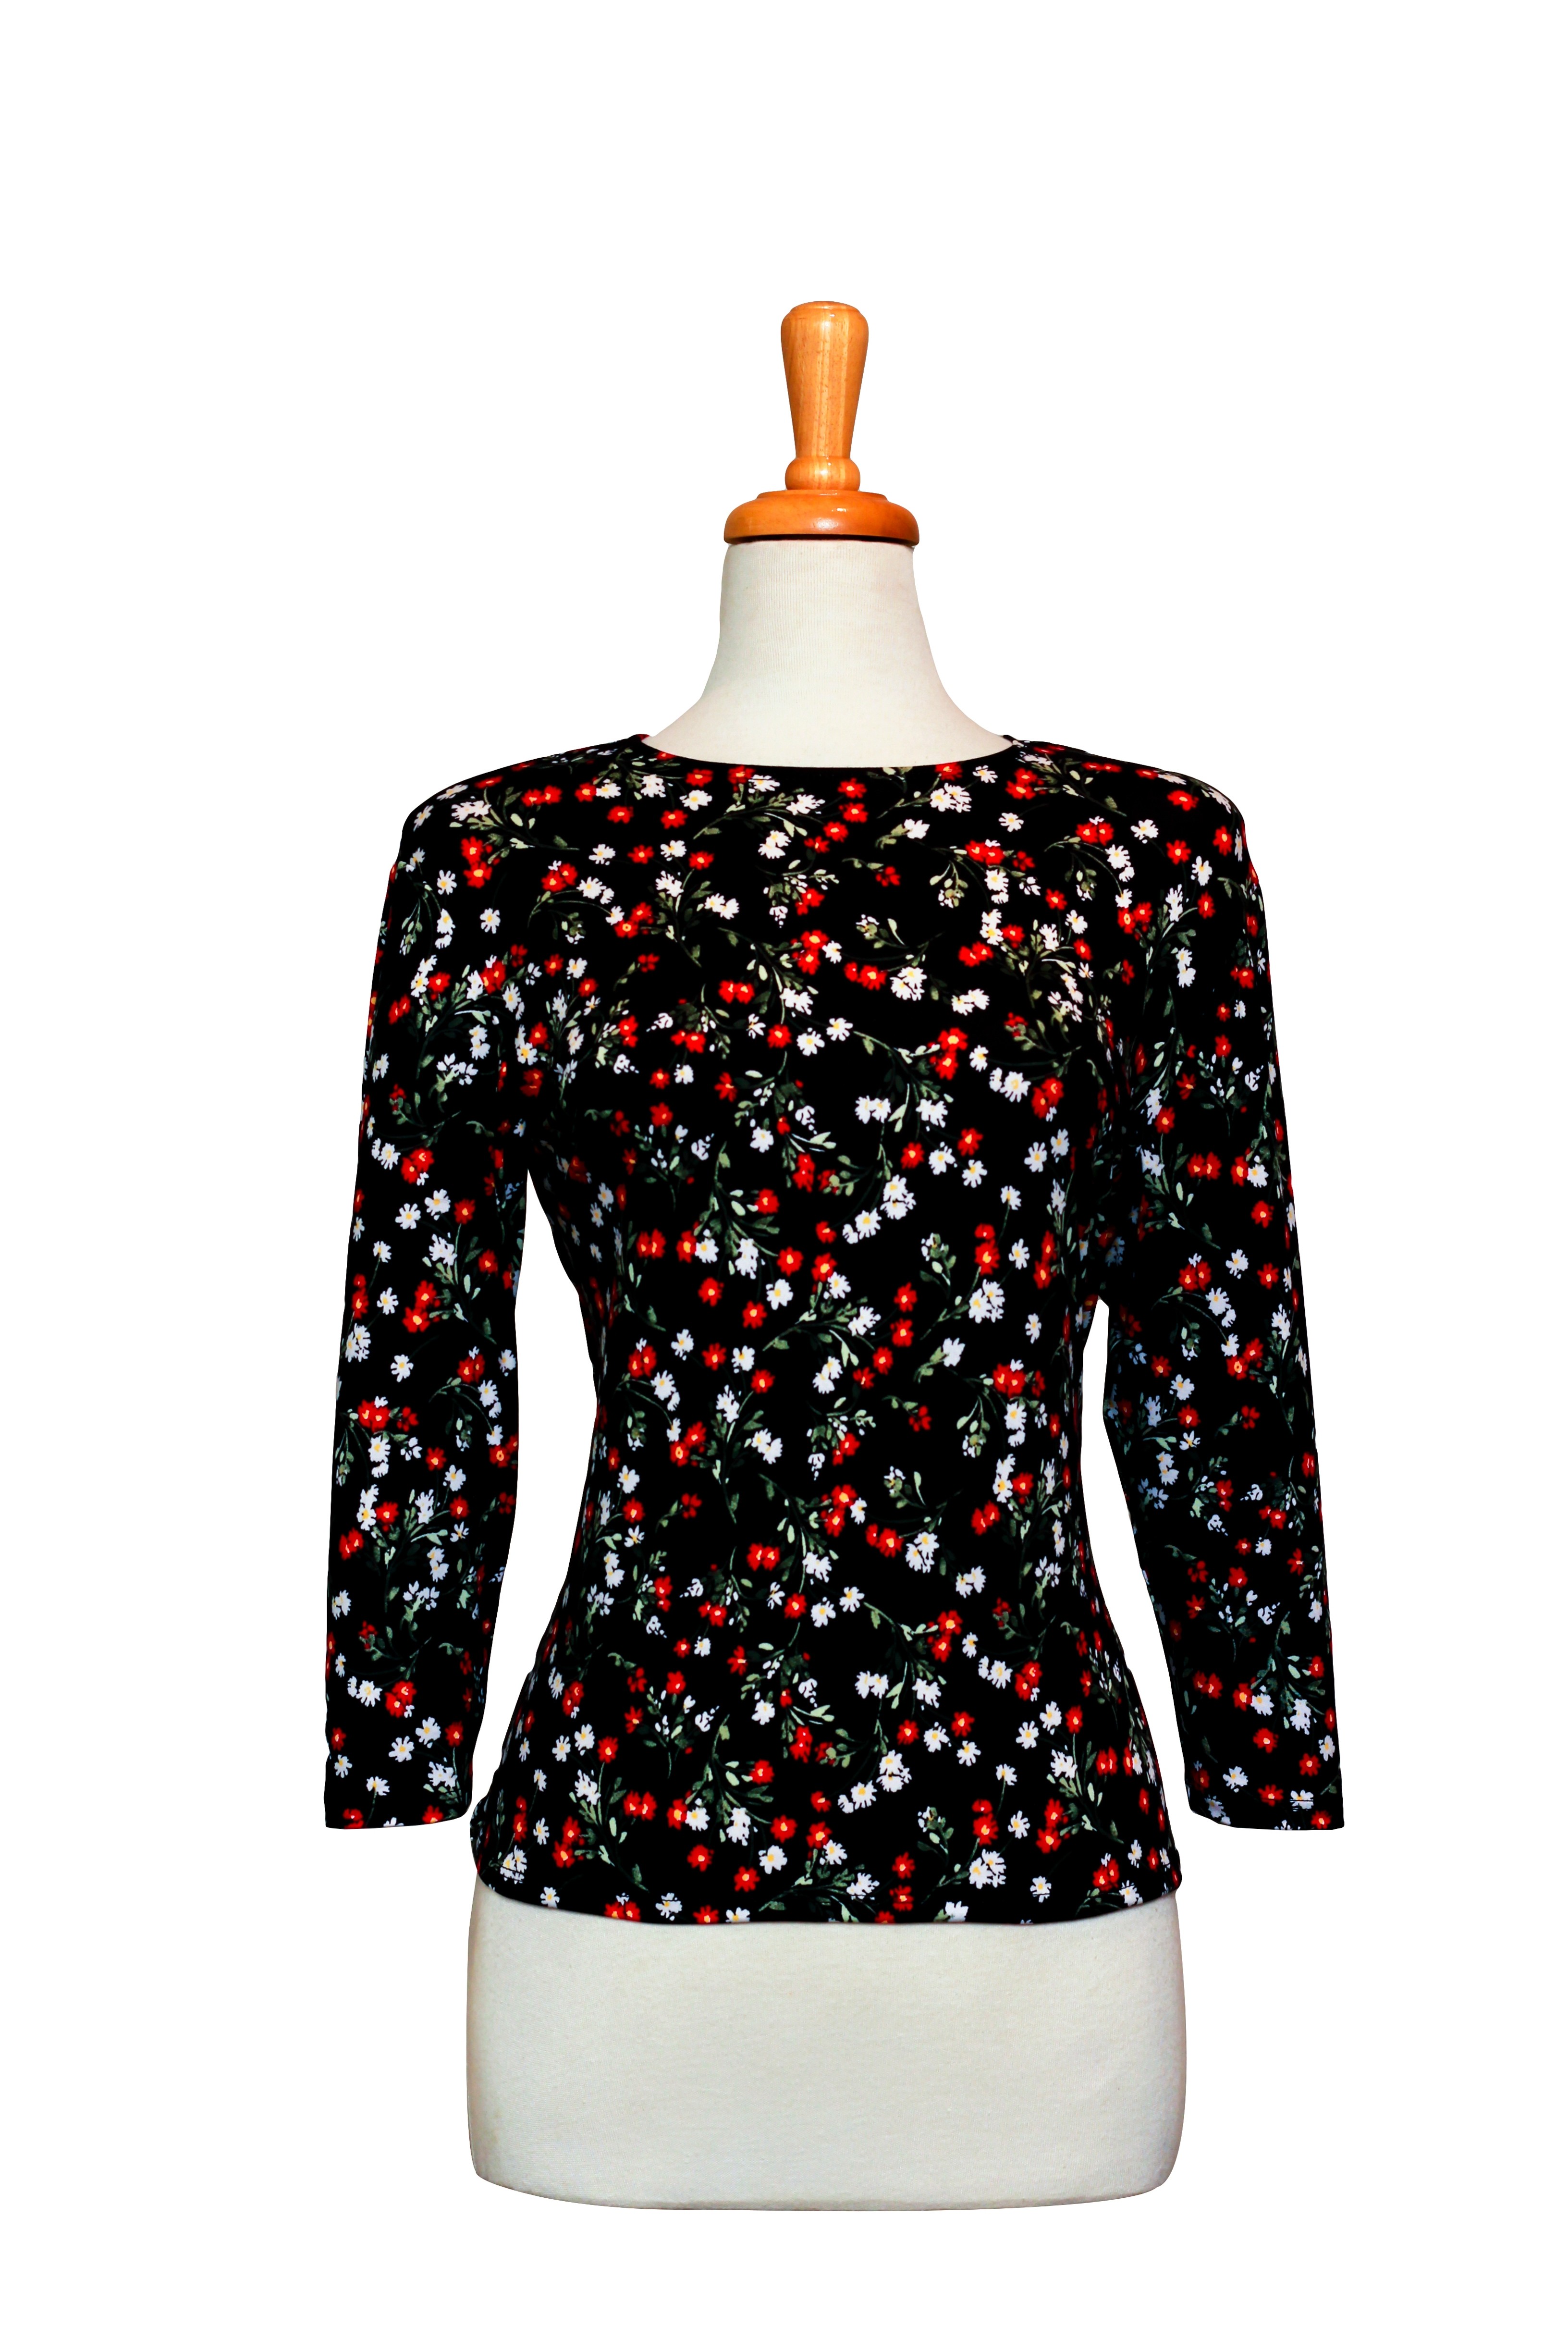 Plus Size Black Red and White Mini Floral Cotton 3/4 Sleeve Top 